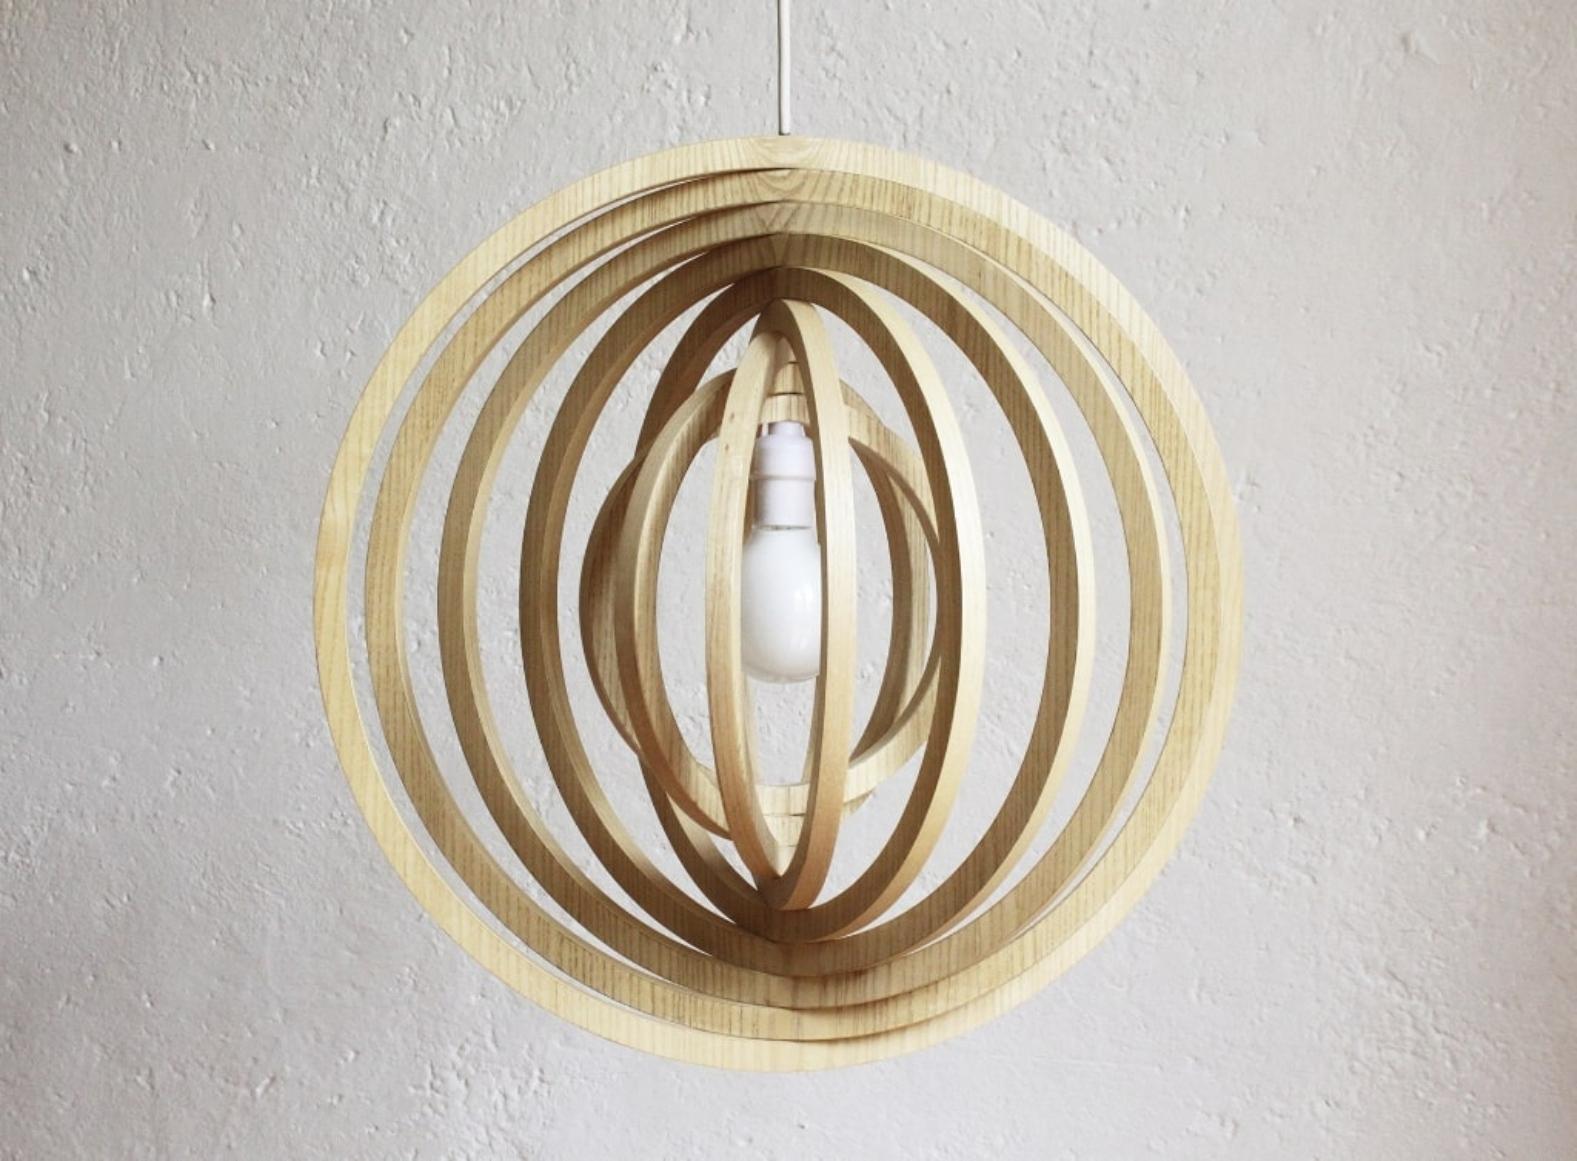 Wood Engiro Ceiling Light, Maria Beckmann, Represented by Tuleste Factory For Sale